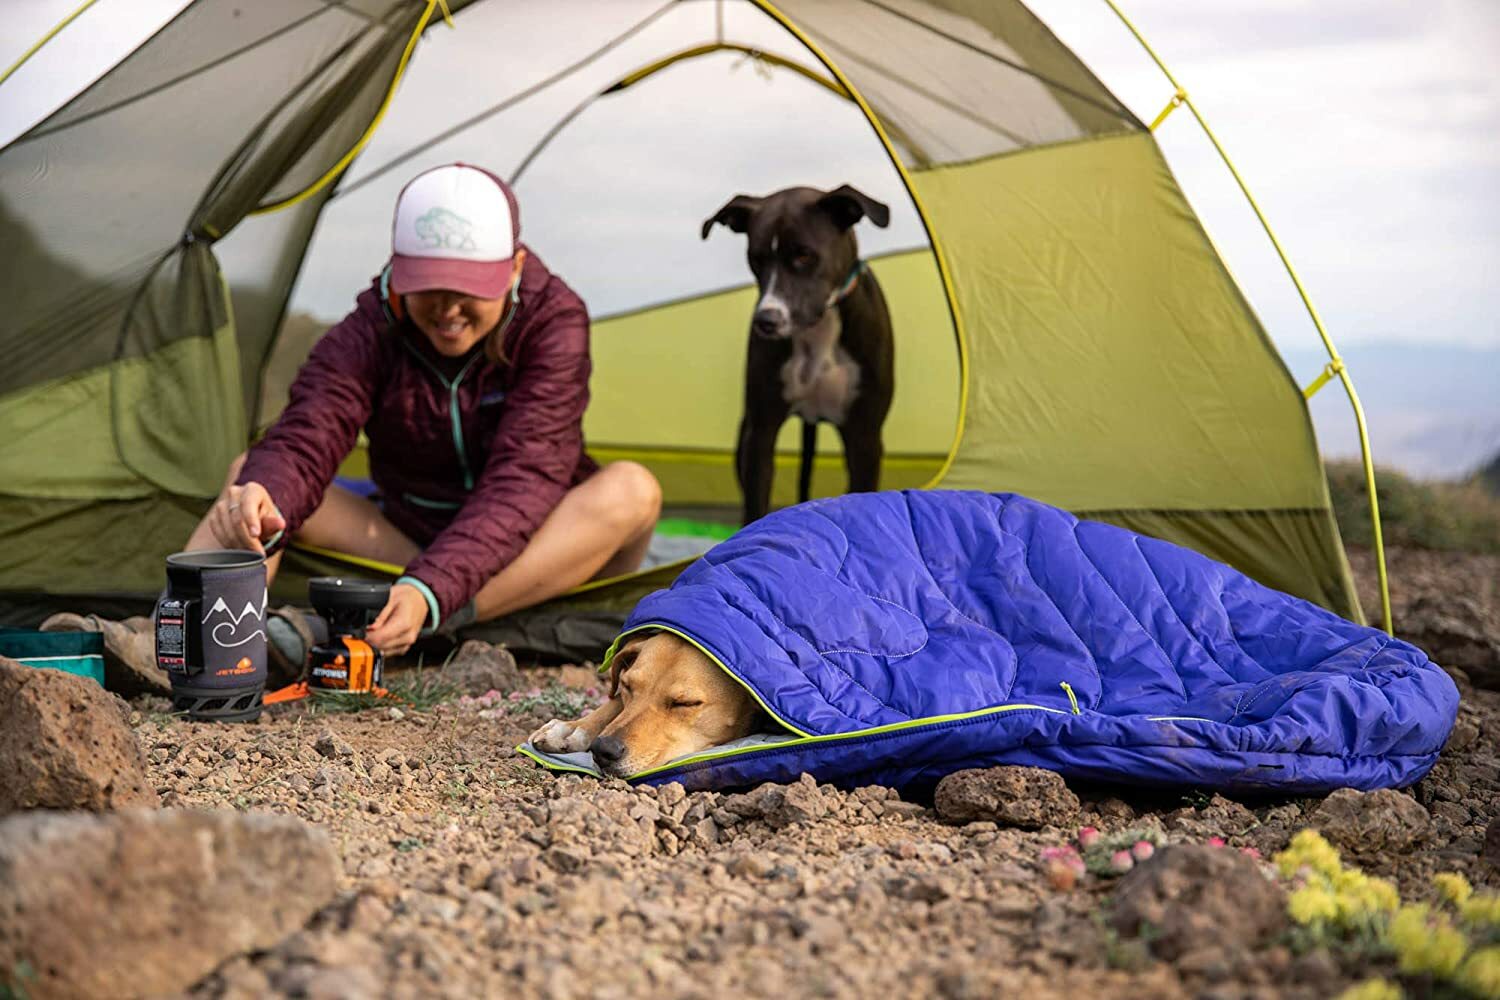 The best camping gear for dogs: We’ve tried (and loved) these 8 products